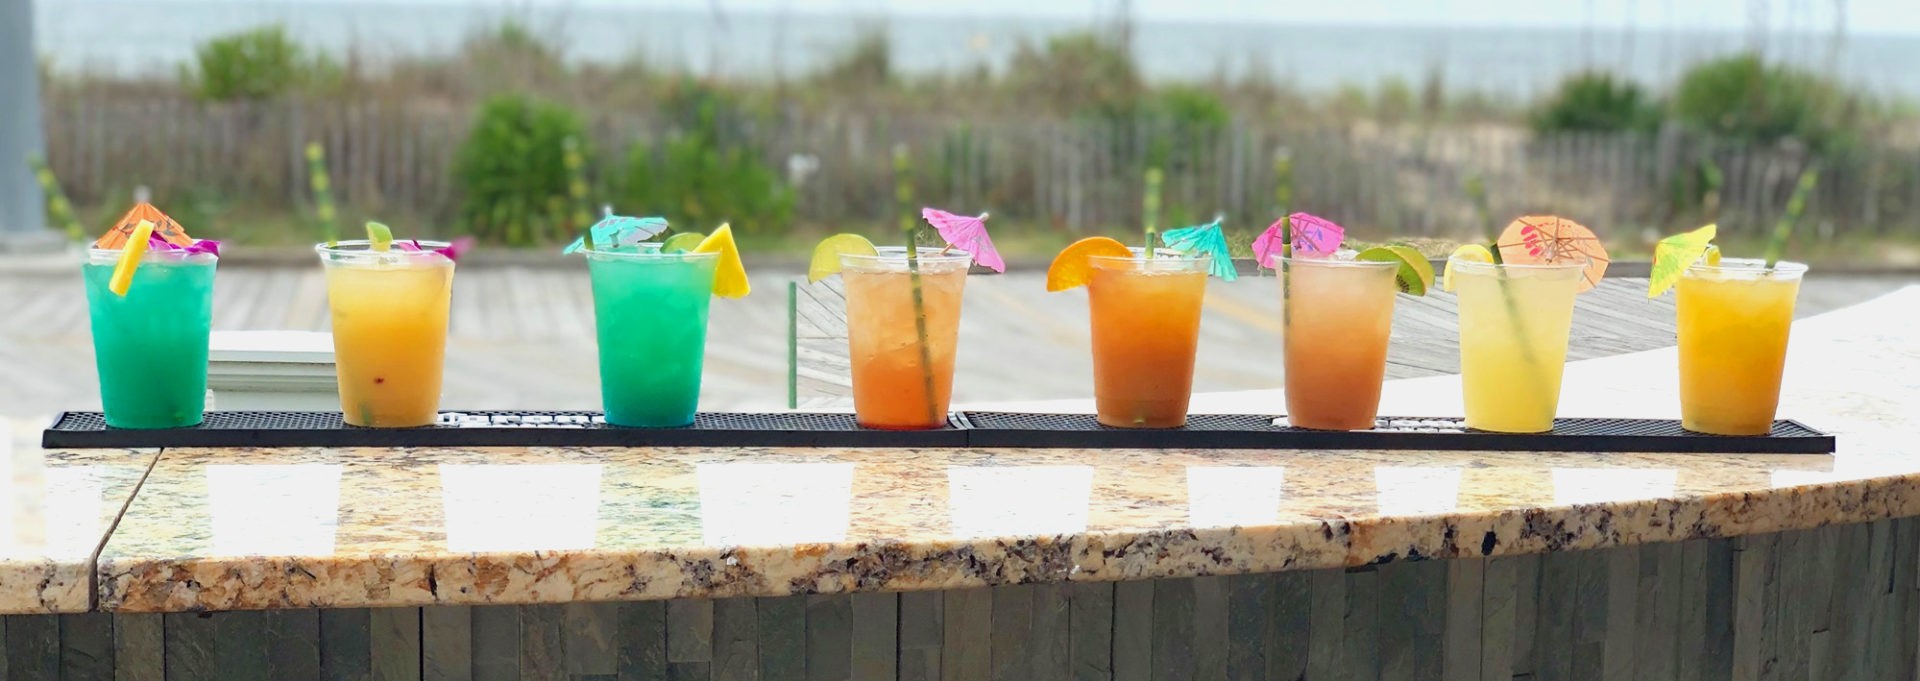 Variety of tiki hut drinks on the outdoor bar counter